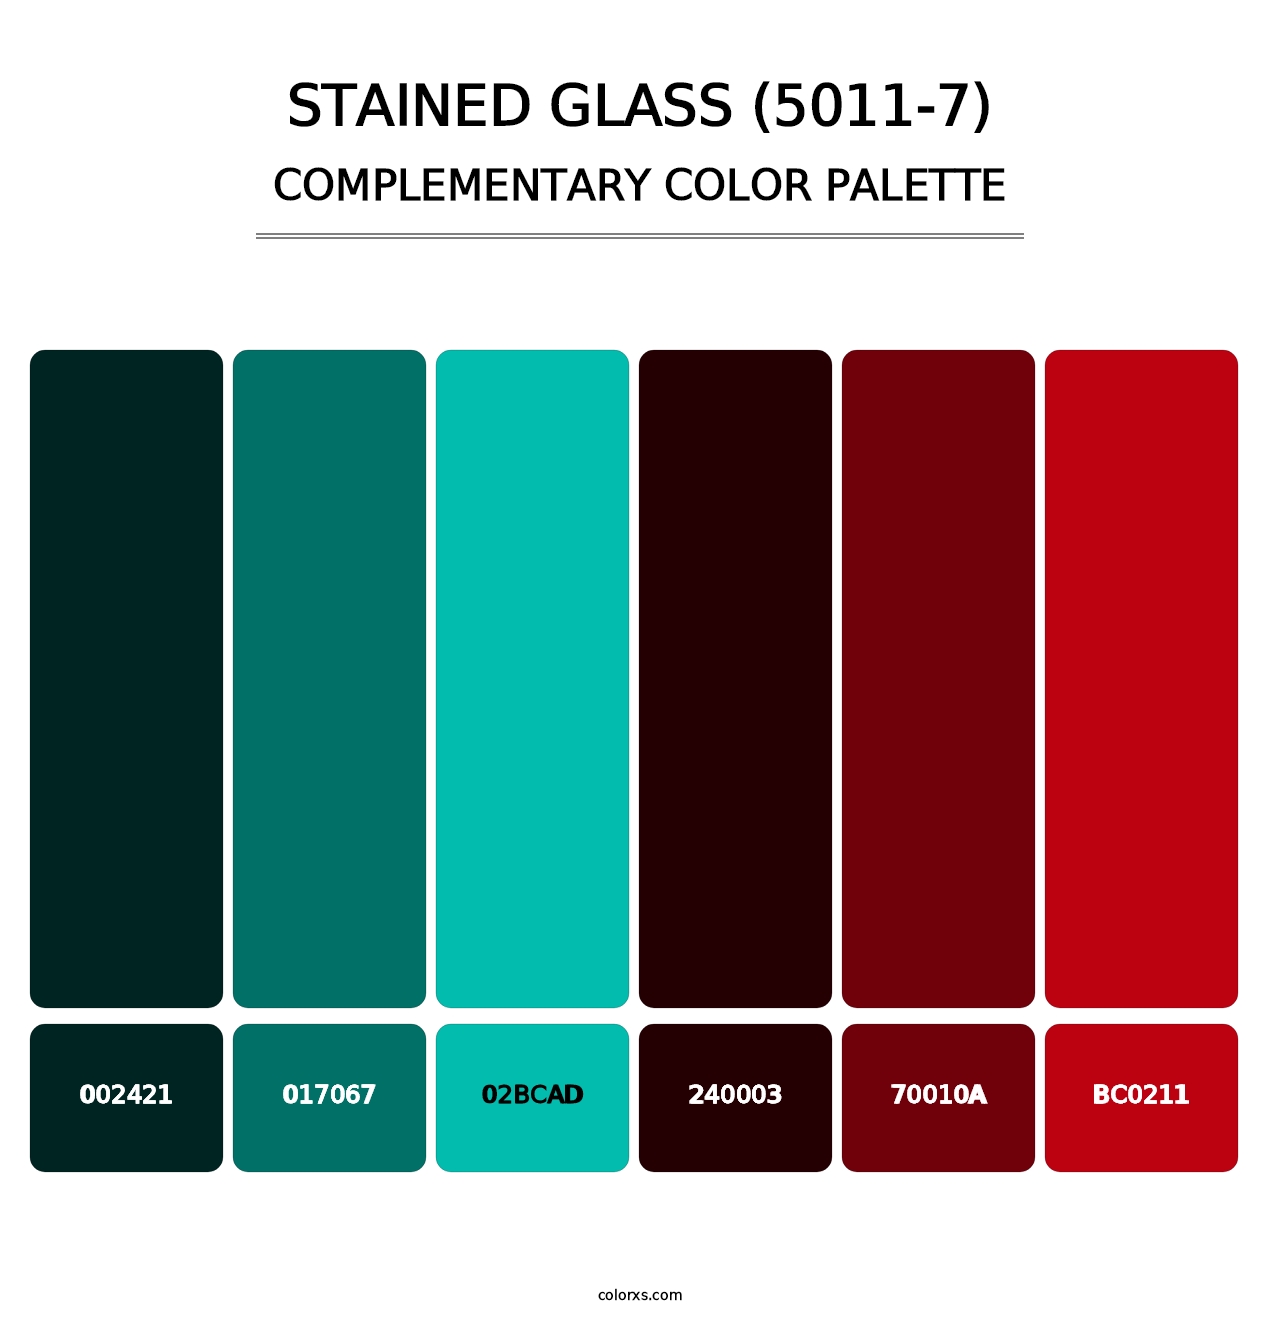 Stained Glass (5011-7) - Complementary Color Palette